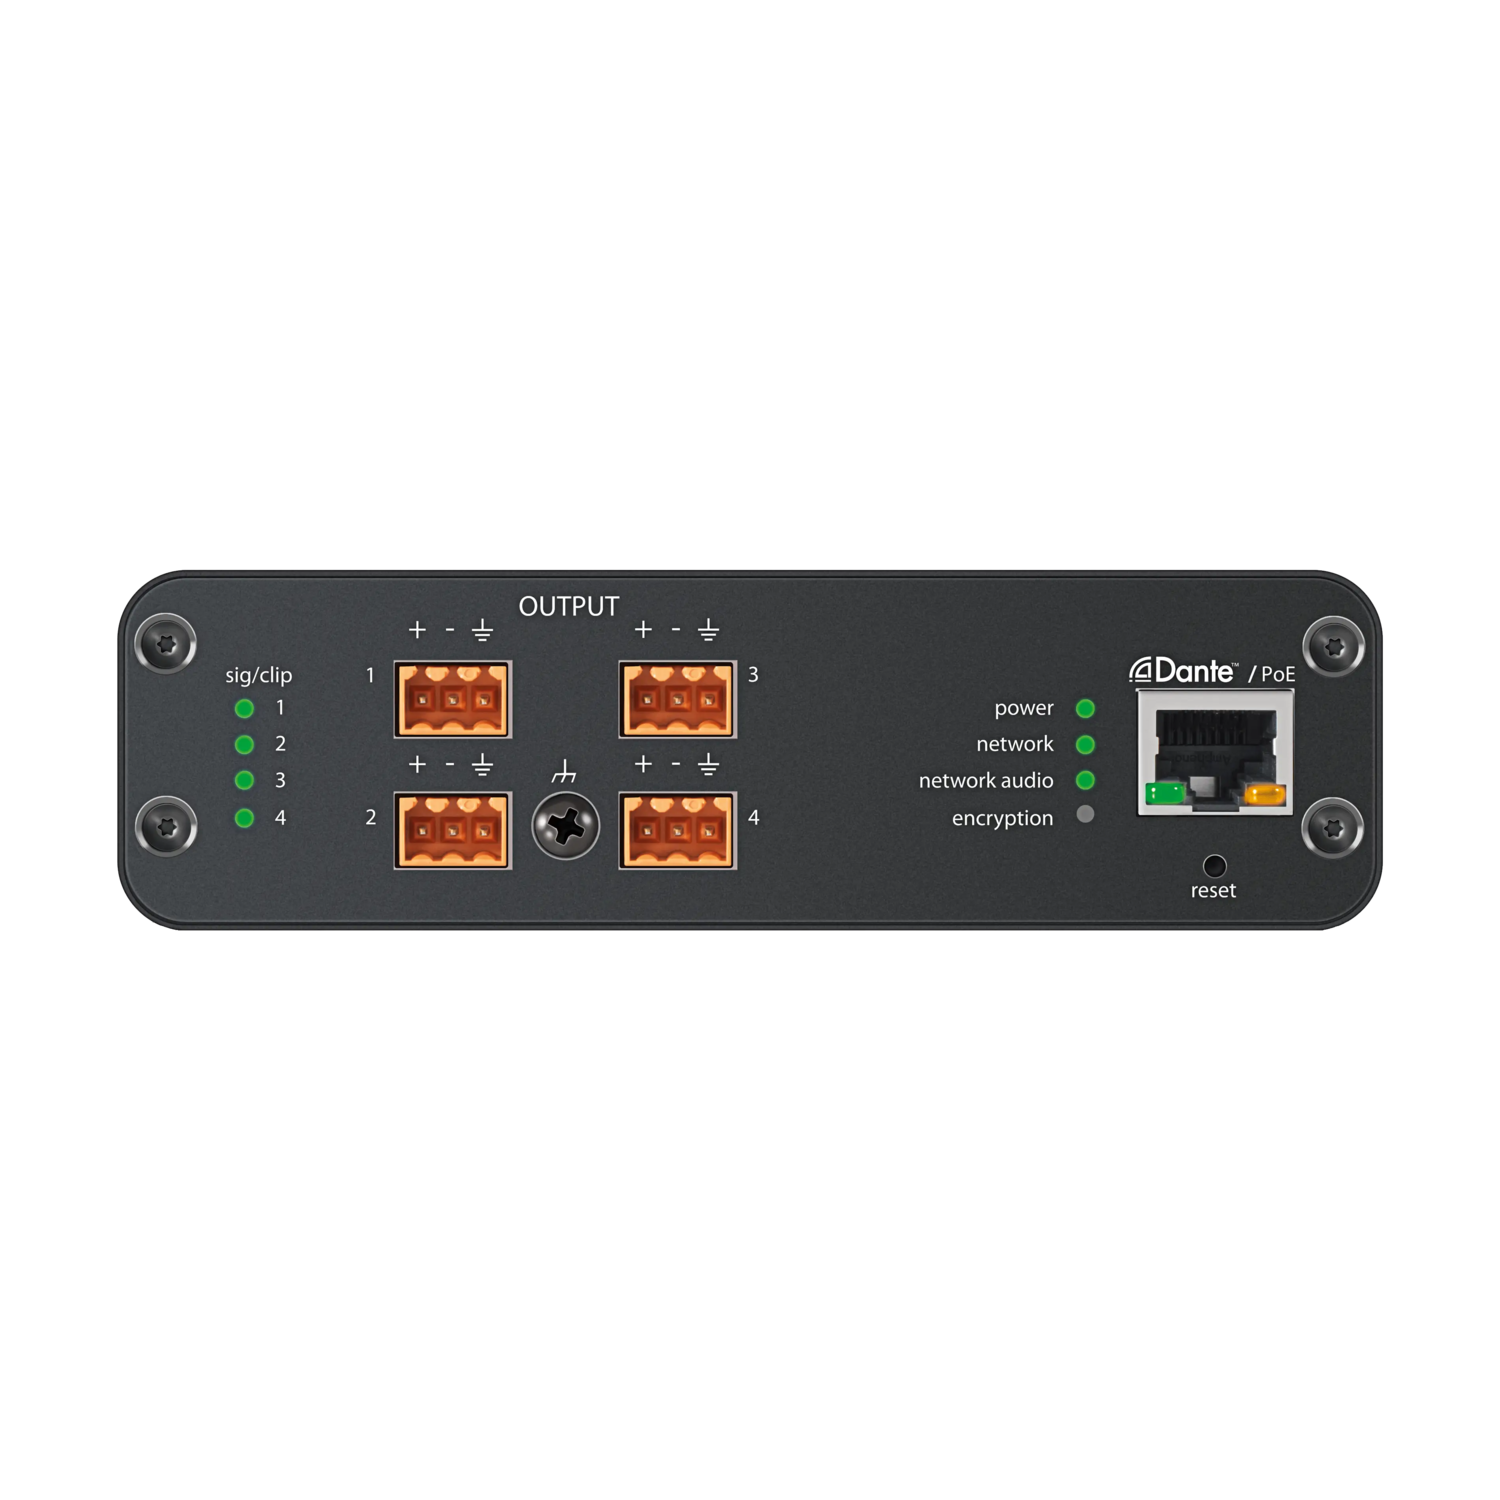 ANI4OUT - Audio Network Interface - Shure USA